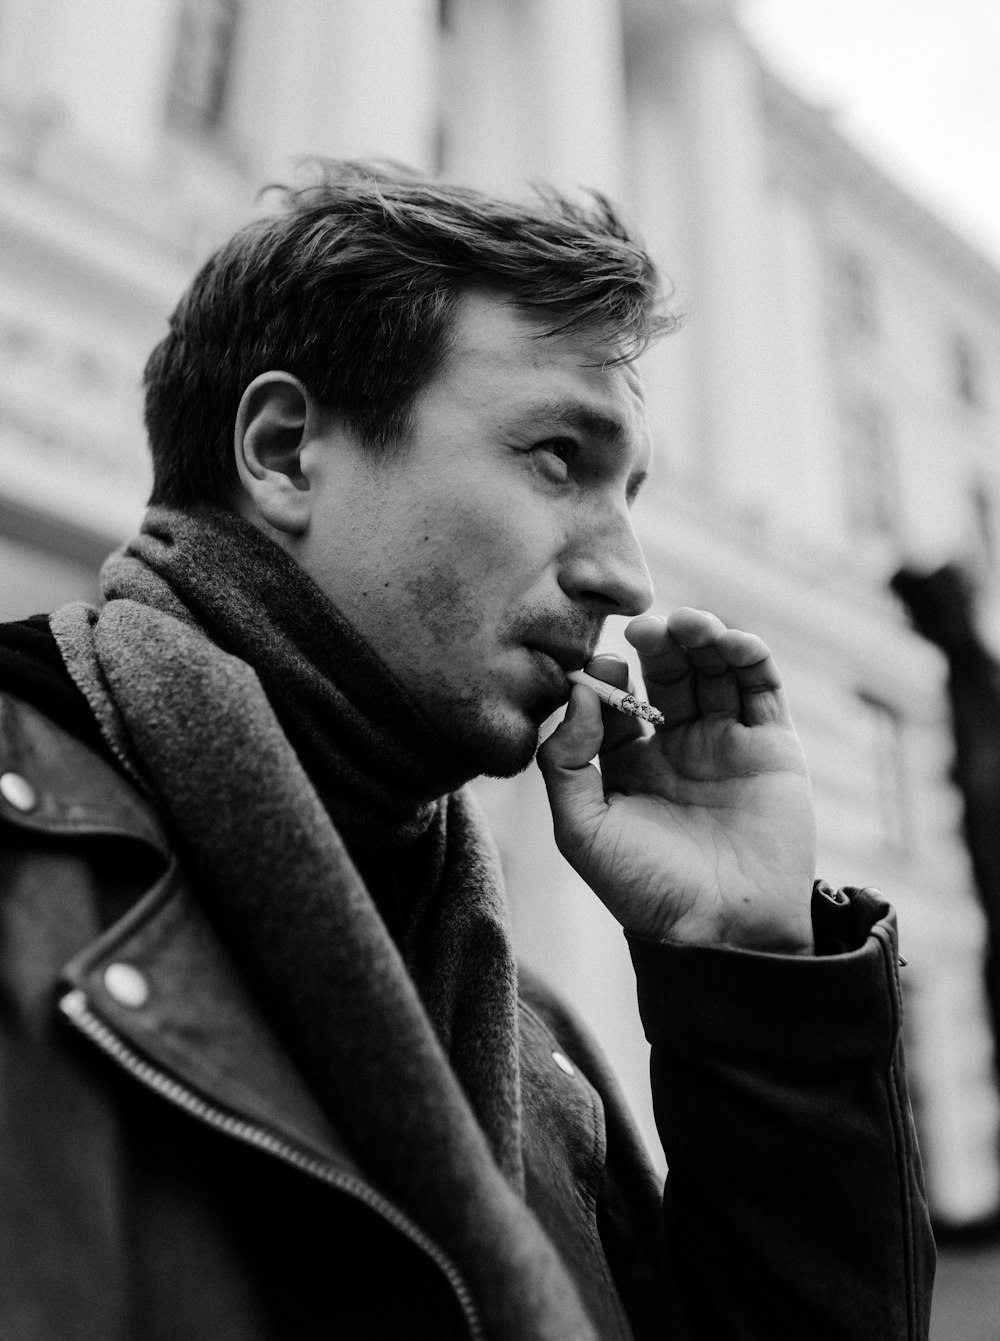 a man smoking a cigarette in a black and white photo